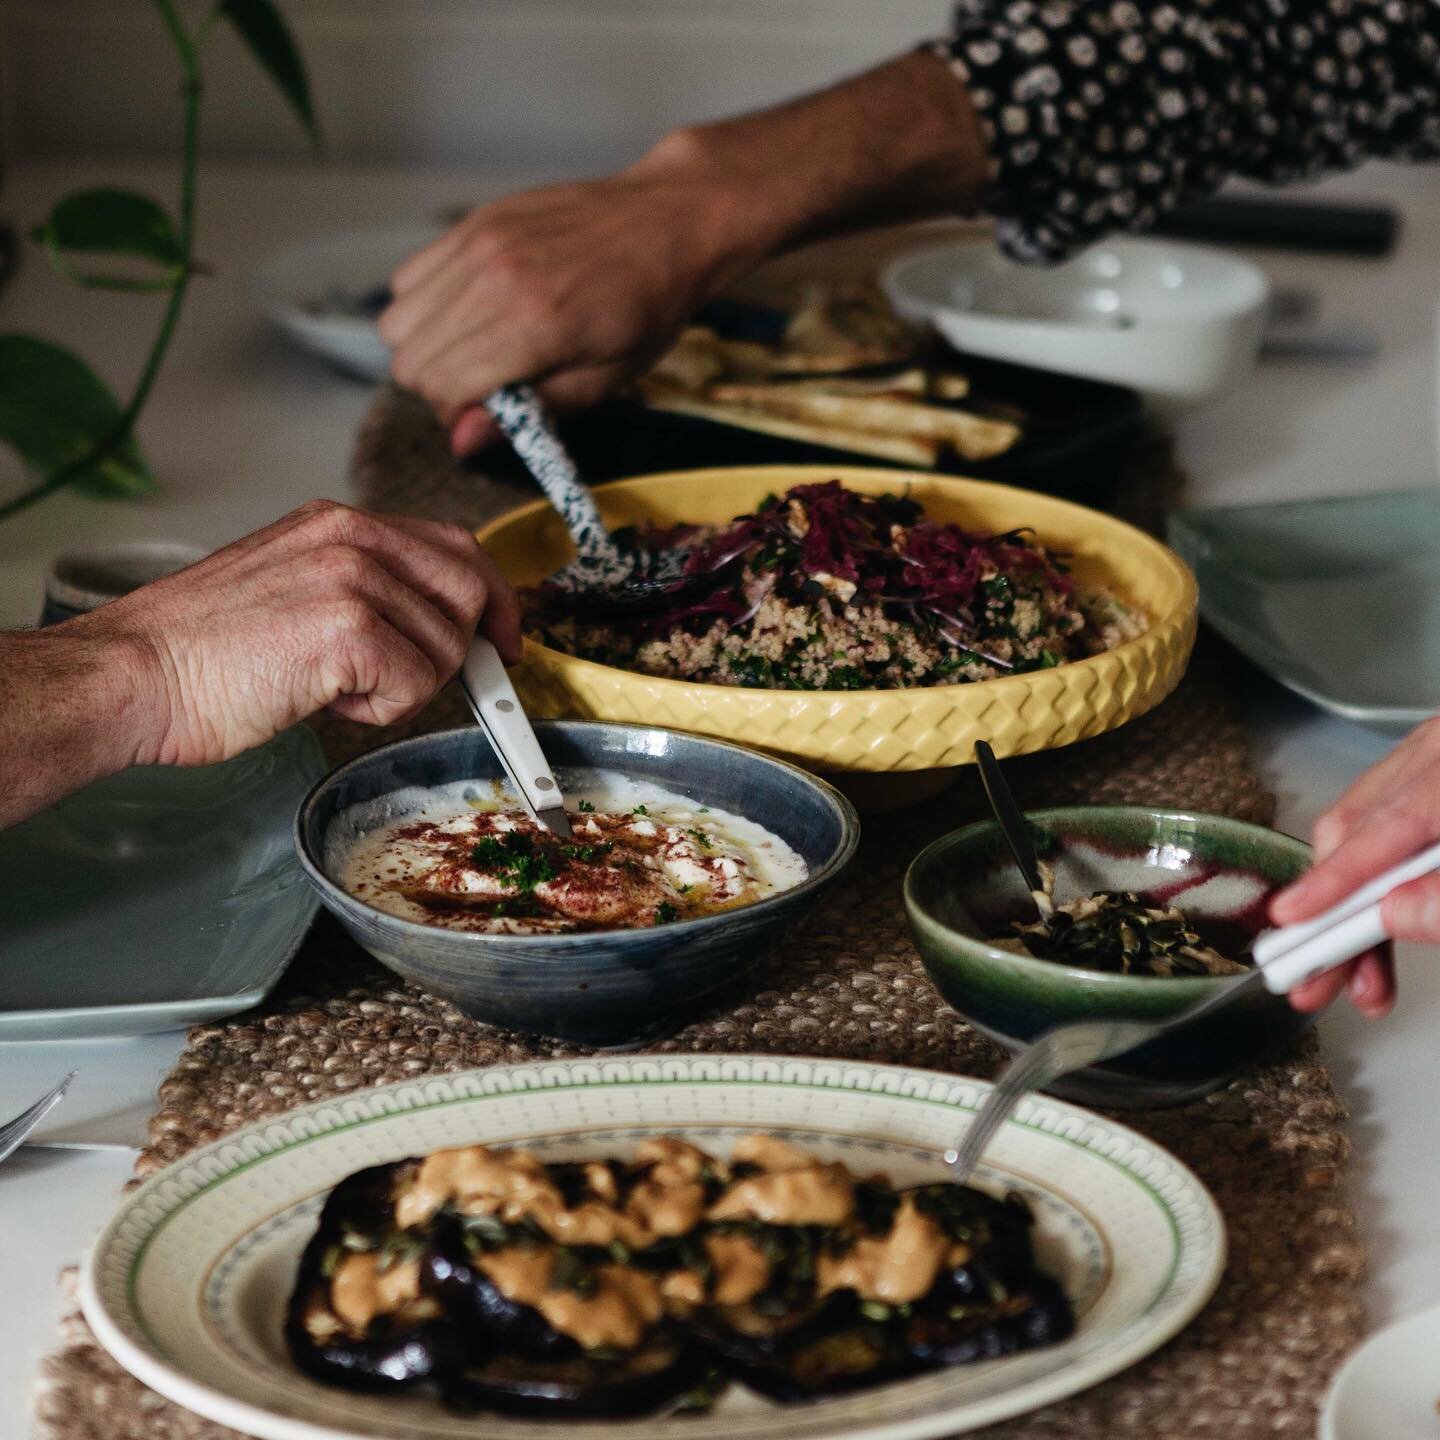 Do you view food as just fuel or one of life&rsquo;s greatest enjoyments? 
⠀⠀⠀⠀⠀⠀⠀⠀⠀
For me it&rsquo;s the latter. Being Iranian, food is huge! It&rsquo;s the glue that connects us. Back in the homeland, each day begins by waking in the early hours t